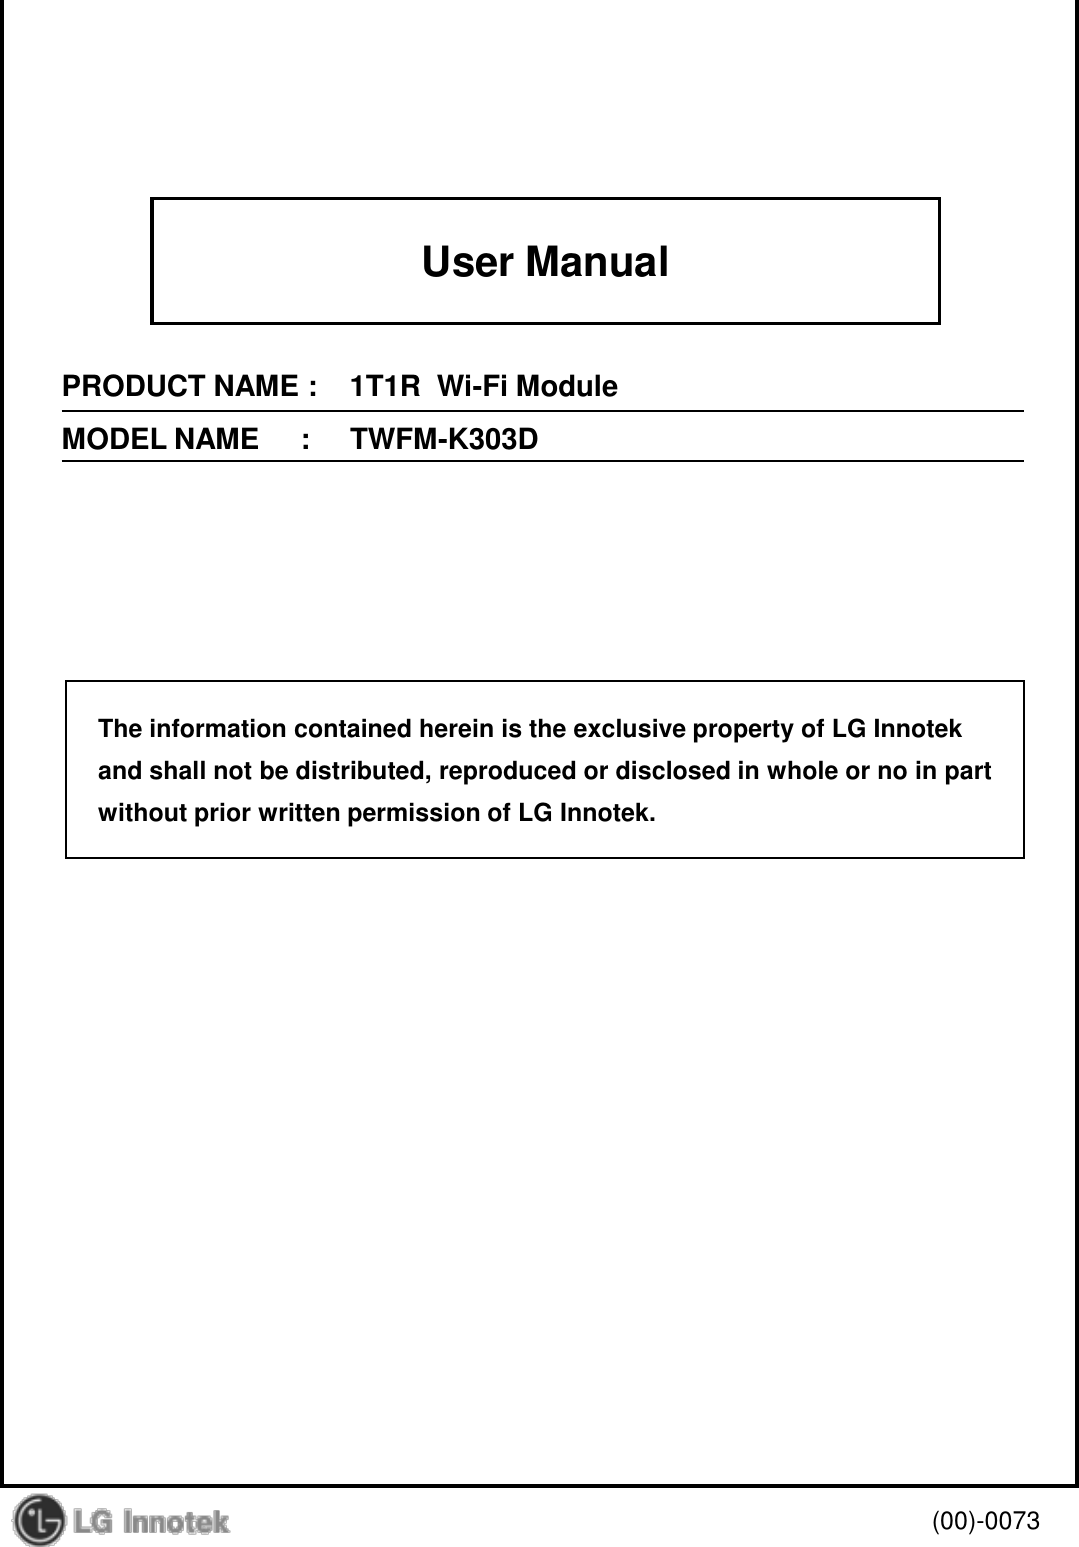 User ManualPRODUCT NAME :    1T1R  Wi-Fi ModuleMODEL NAME     :     TWFM-K303D(00)-0073The information contained herein is the exclusive property of LG Innotekand shall not be distributed, reproduced or disclosed in whole or no in partwithout prior written permission of LG Innotek.